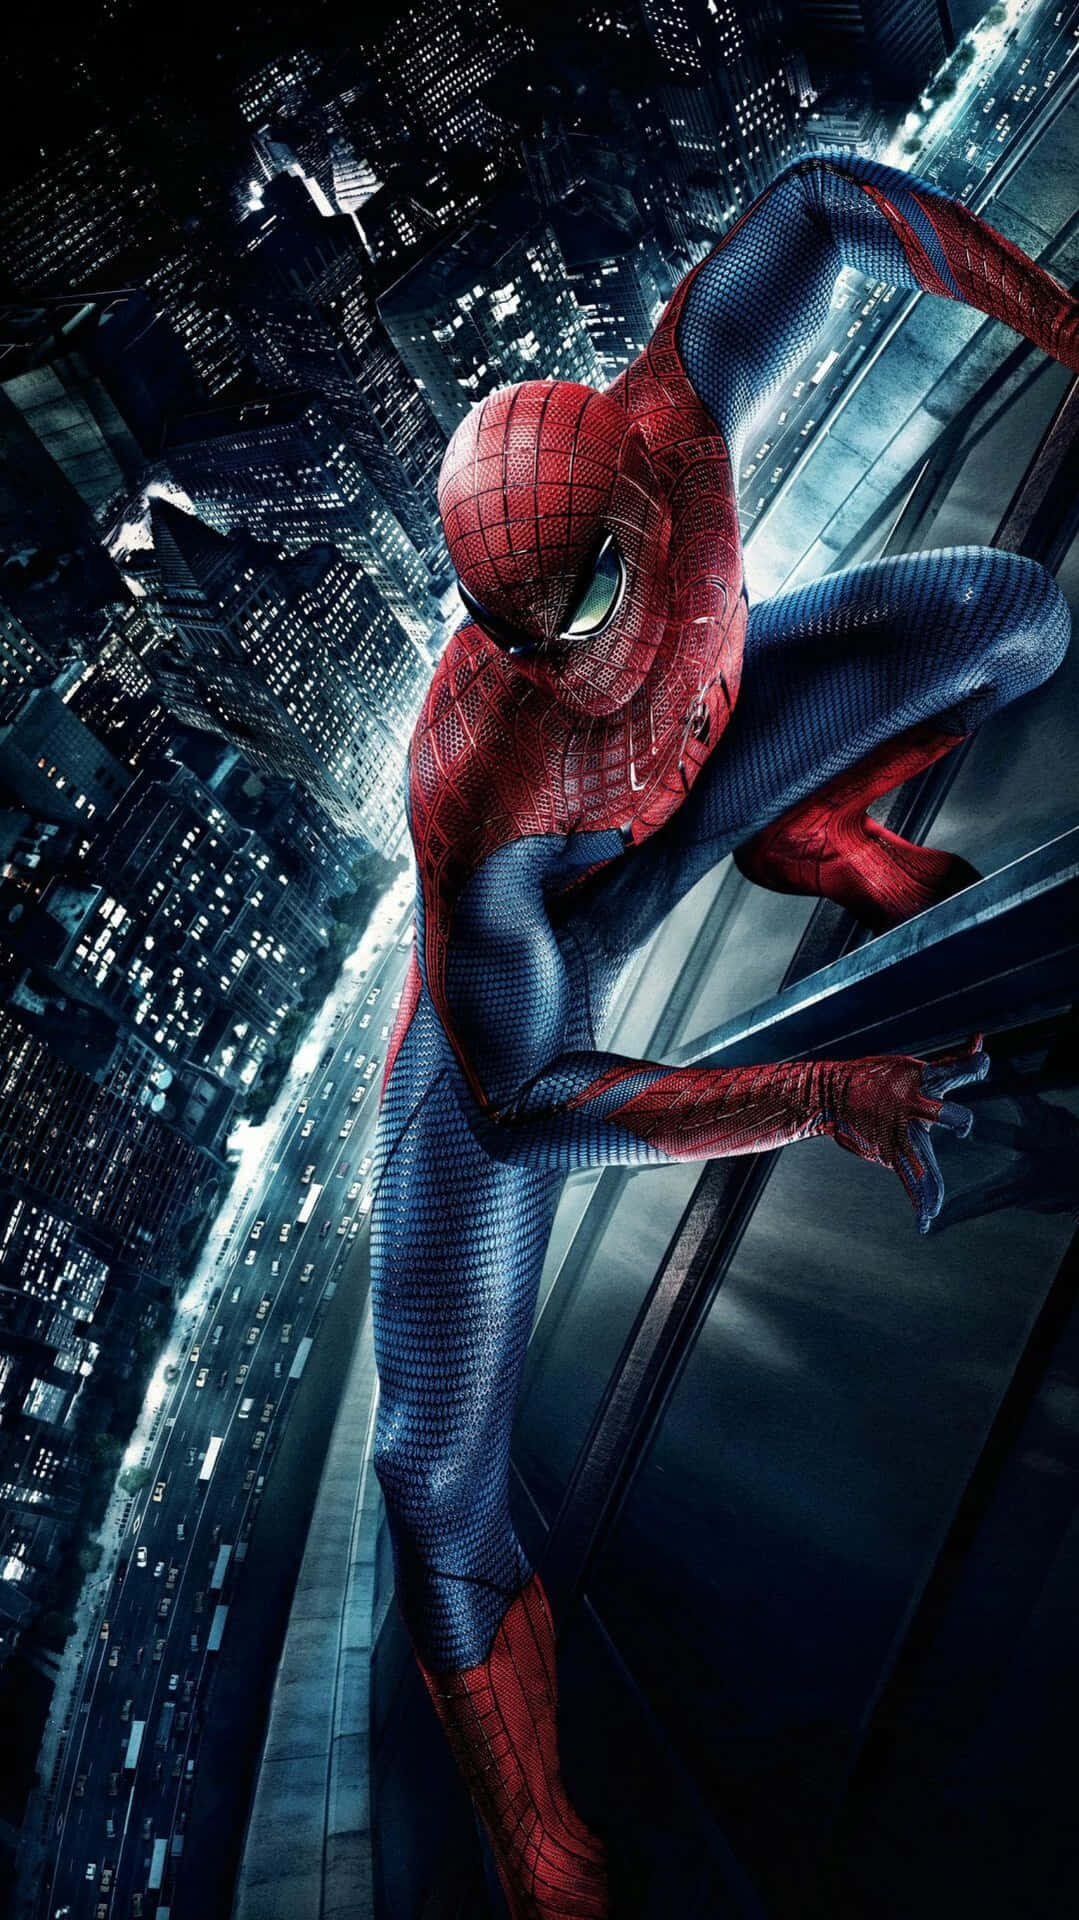 Get the Marvel superhero experience on your iPhone with the Amazing Spider Man! Wallpaper